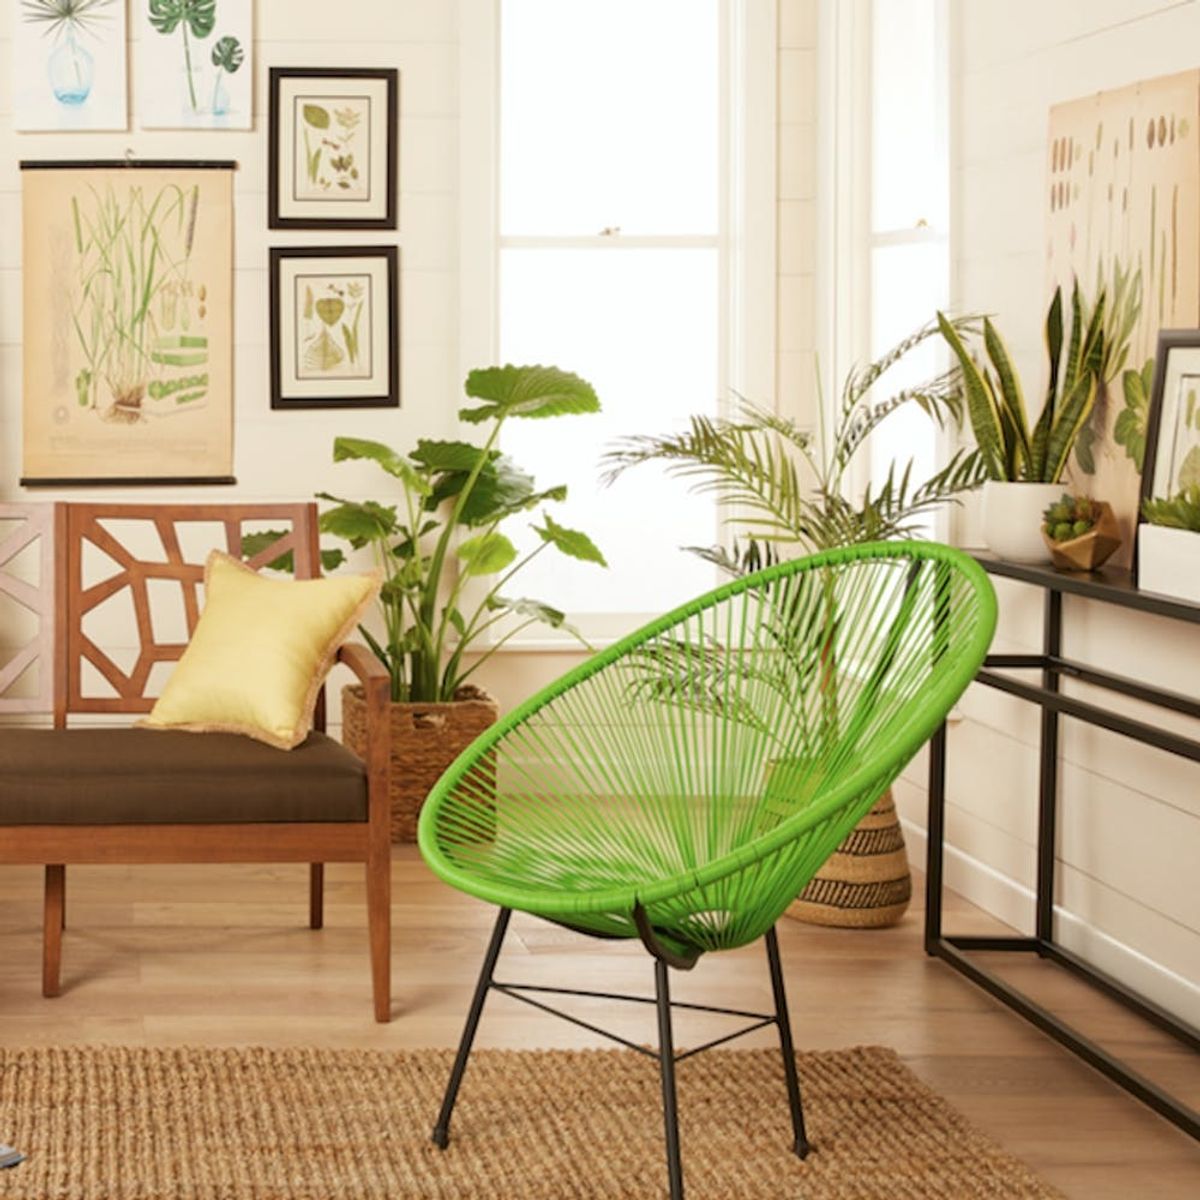 Walmart’s New Spring Home Collection Has Some Major Gems